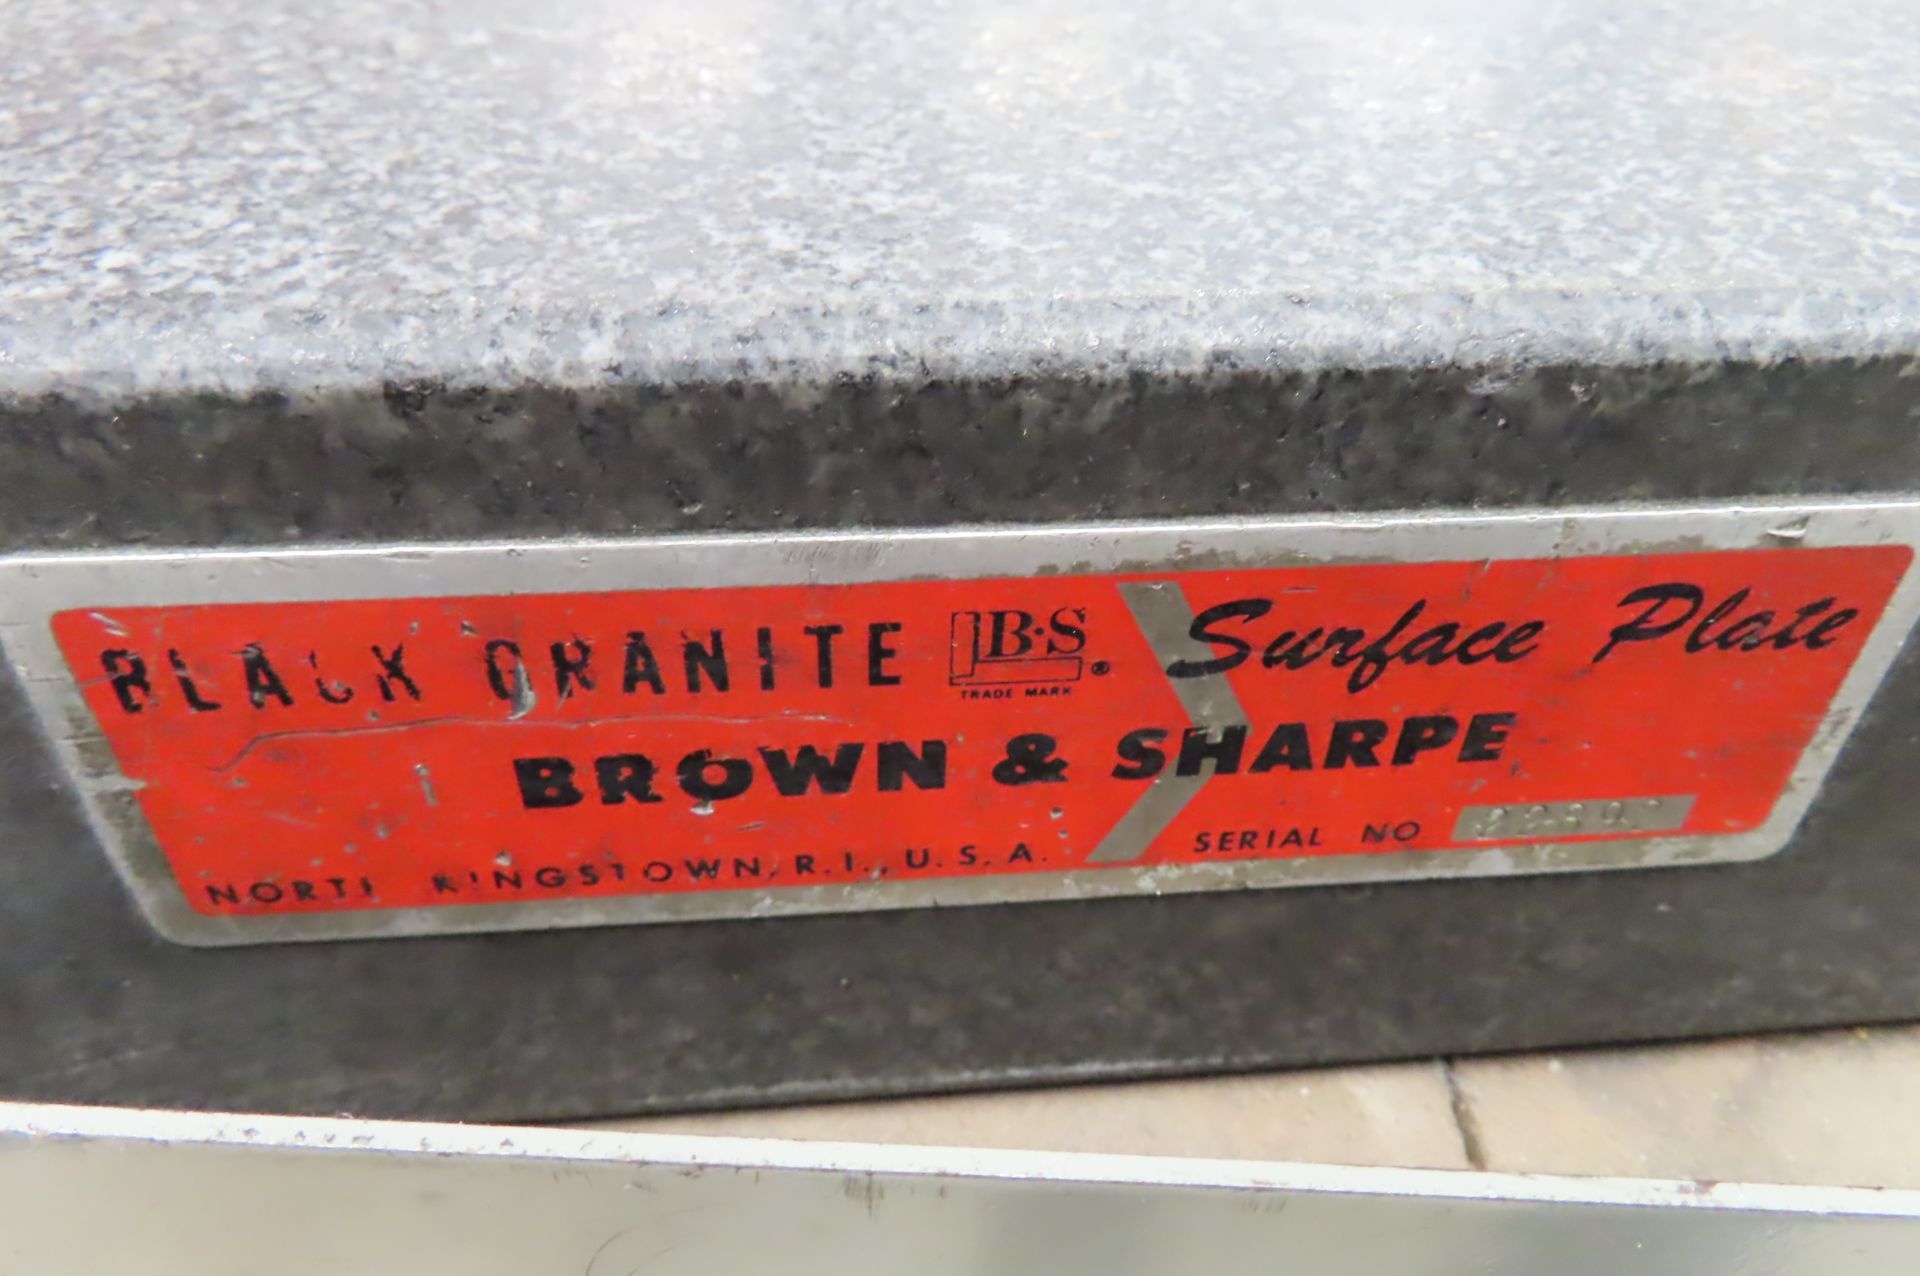 BROWN & SHARPE 18 X 24 X 3 IN. PRECISION GRANITE SURFACE PLATE - Image 4 of 4